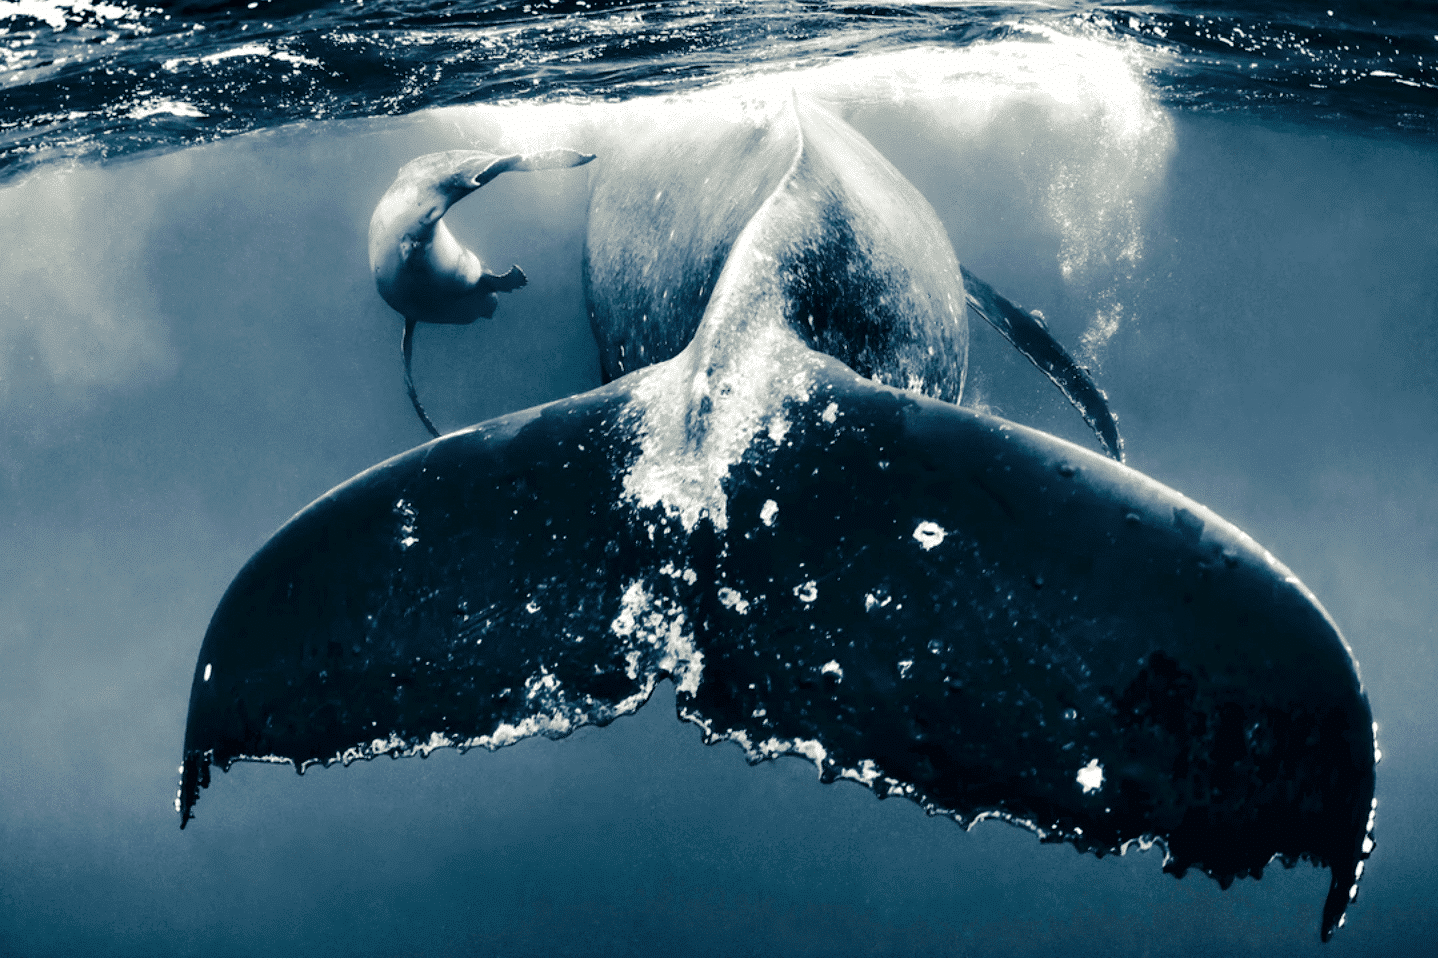 A close up of a whale's tail under the water